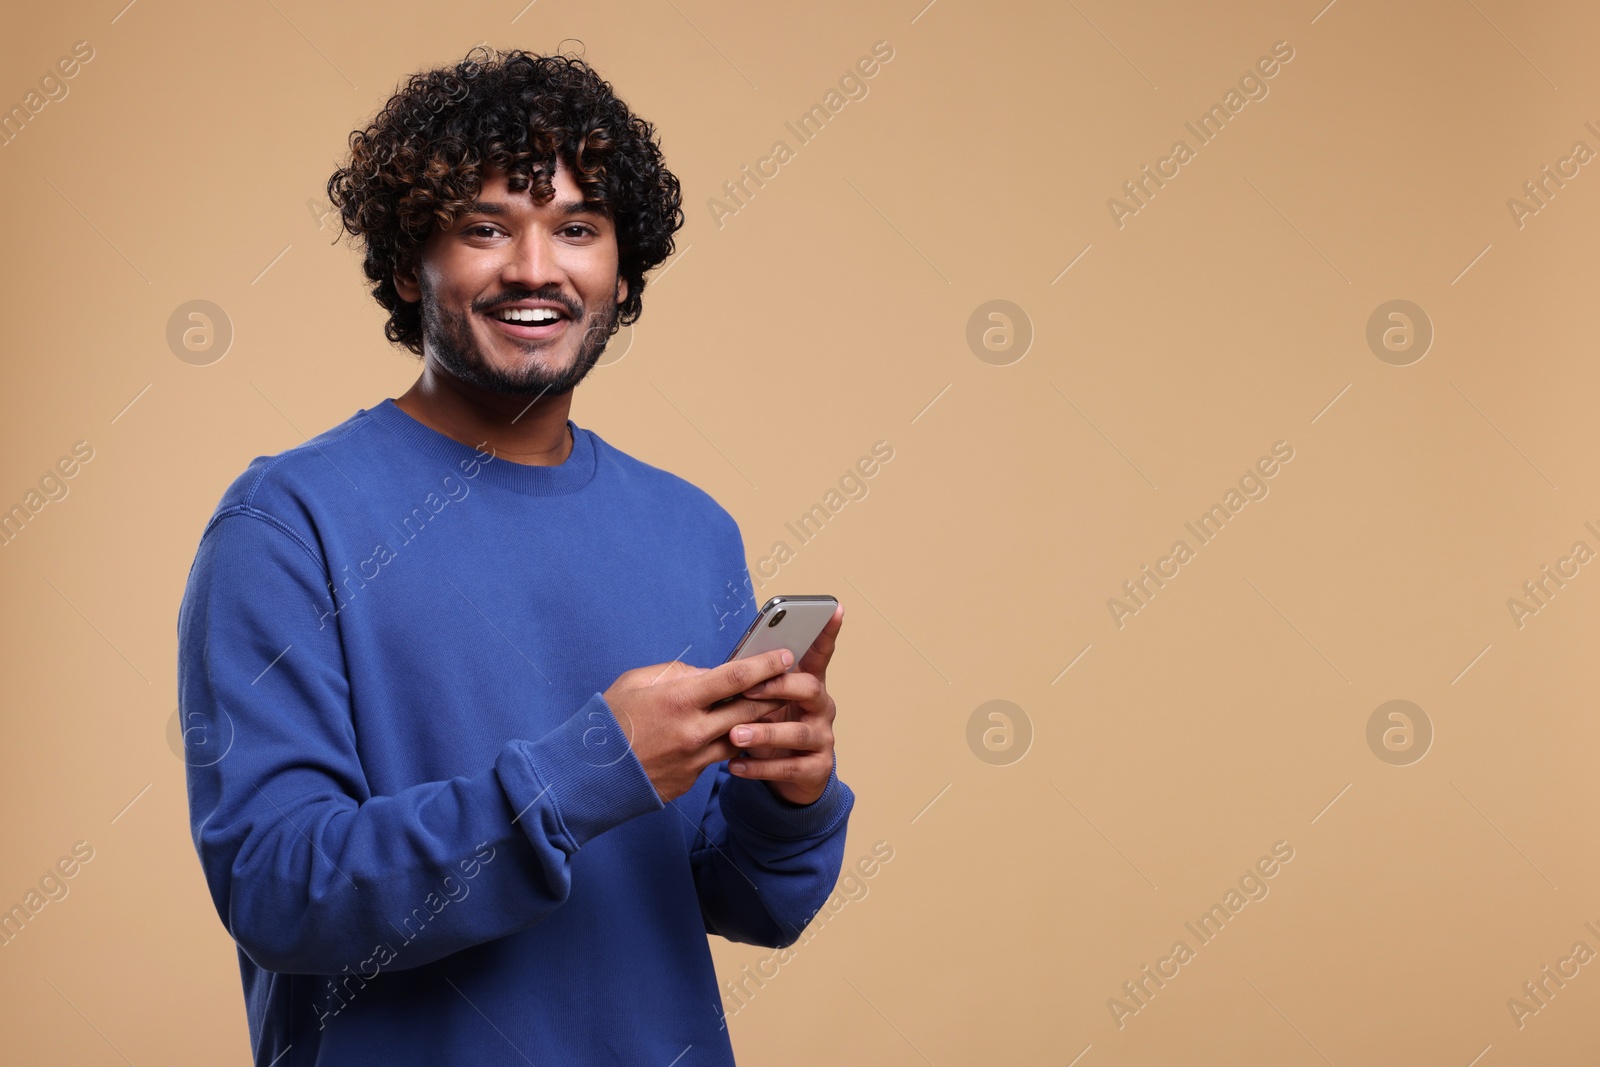 Photo of Handsome smiling man using smartphone on beige background, space for text